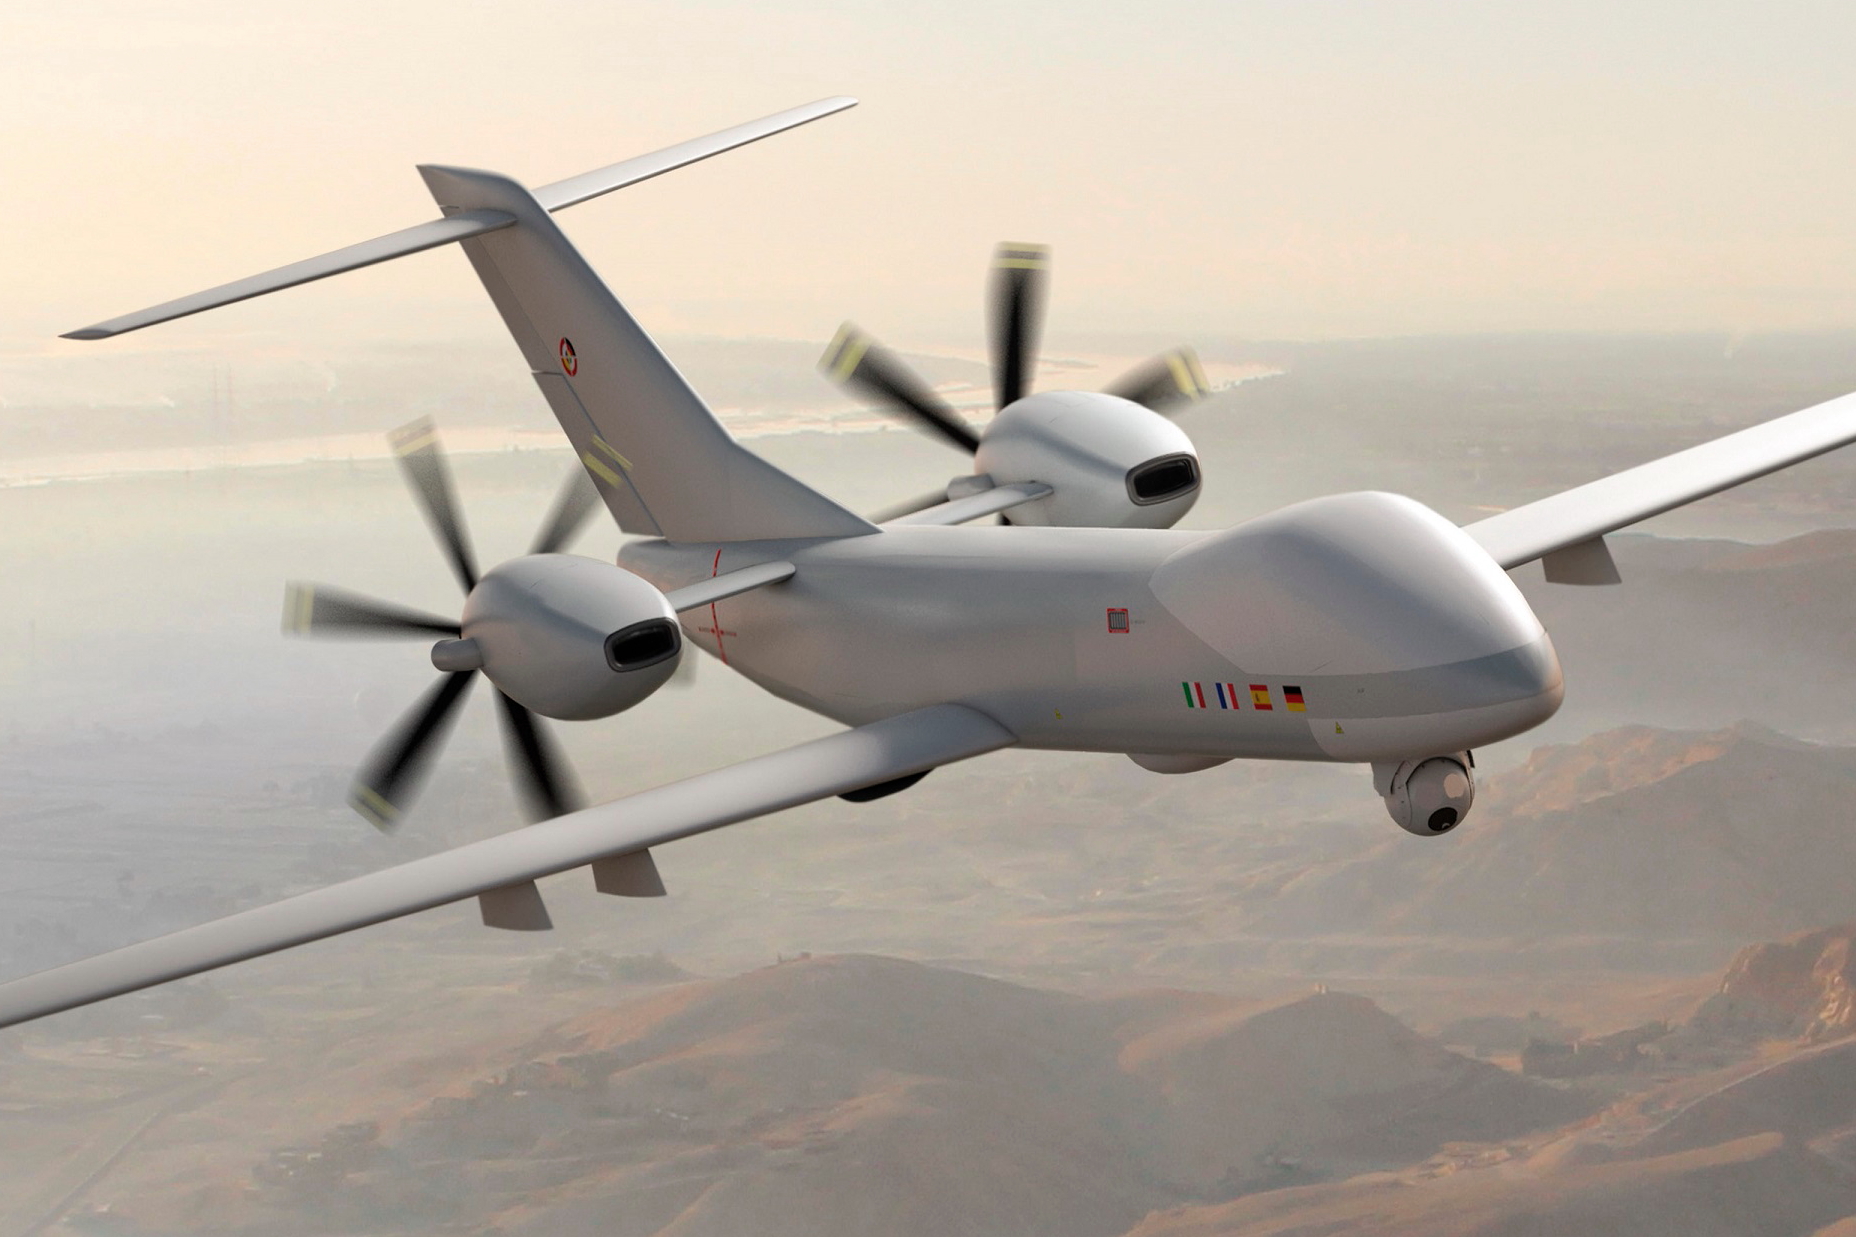 Eurodrone is a Medium Altitude Long Endurance (MALE) Remotely Piloted Aircraft System (RPAS) with versatile and adaptable capabilities designed for Intelligence, Surveillance Target Acquisition and Reconnaissance (ISTAR) missions or homeland security operations Click to enlarge.